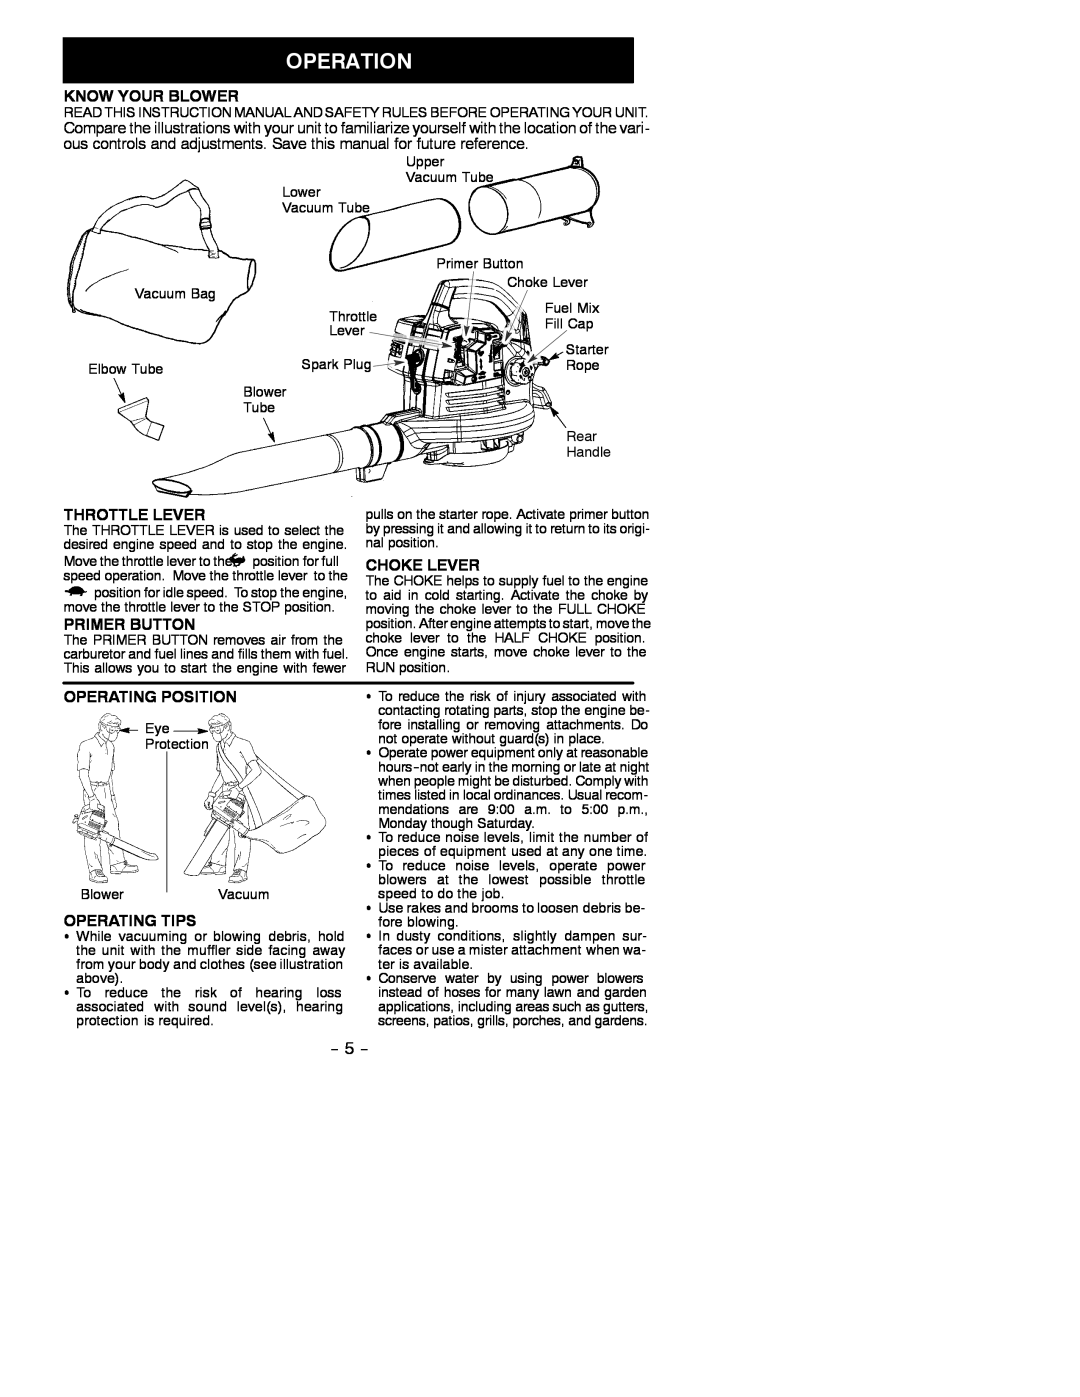 Poulan 530088125 Know Your Blower, Throttle Lever, Choke Lever, Primer Button, Operating Position, Operating Tips 